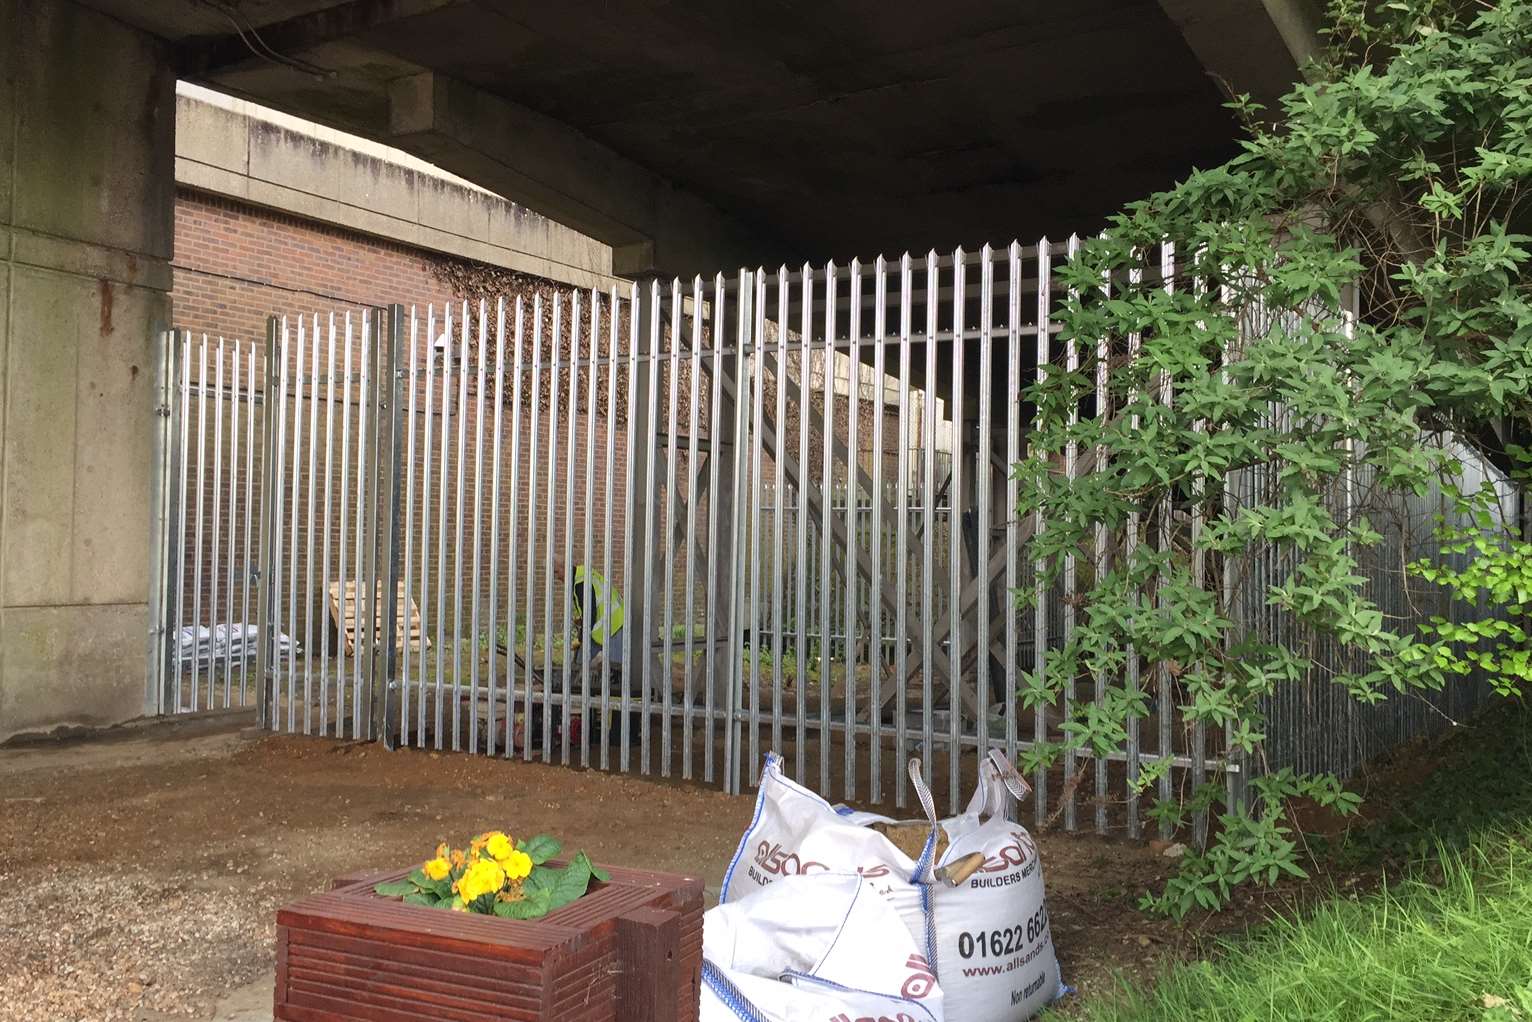 A galvanised steel fence has been erected